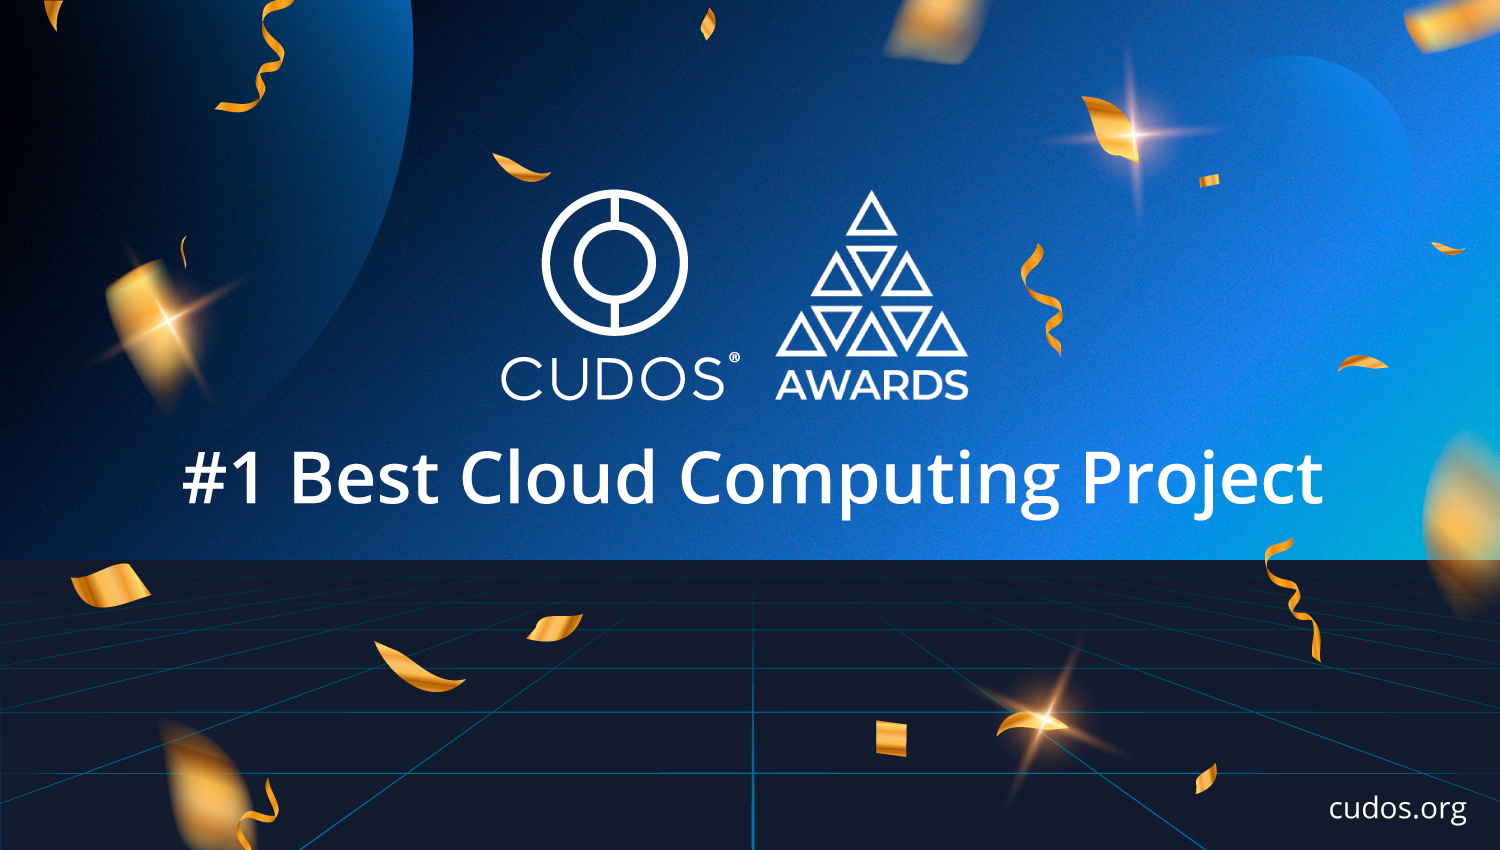 Cudos wins AIBC’s summit best cloud computing project